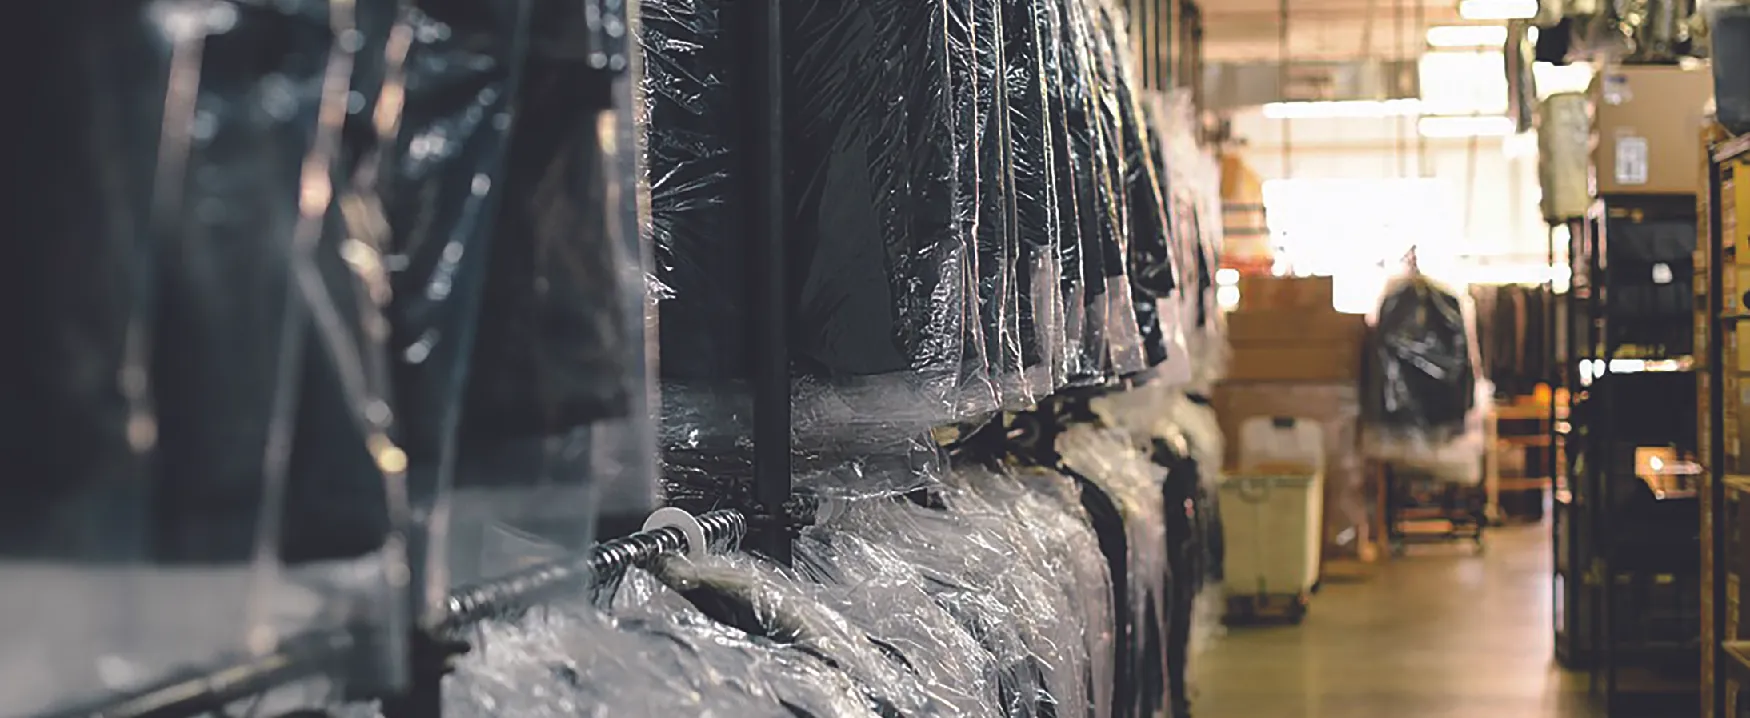 View of interior of dry-cleaning business. On the left are racks of clothes covered in plastic. On the right are shelves holding boxes.